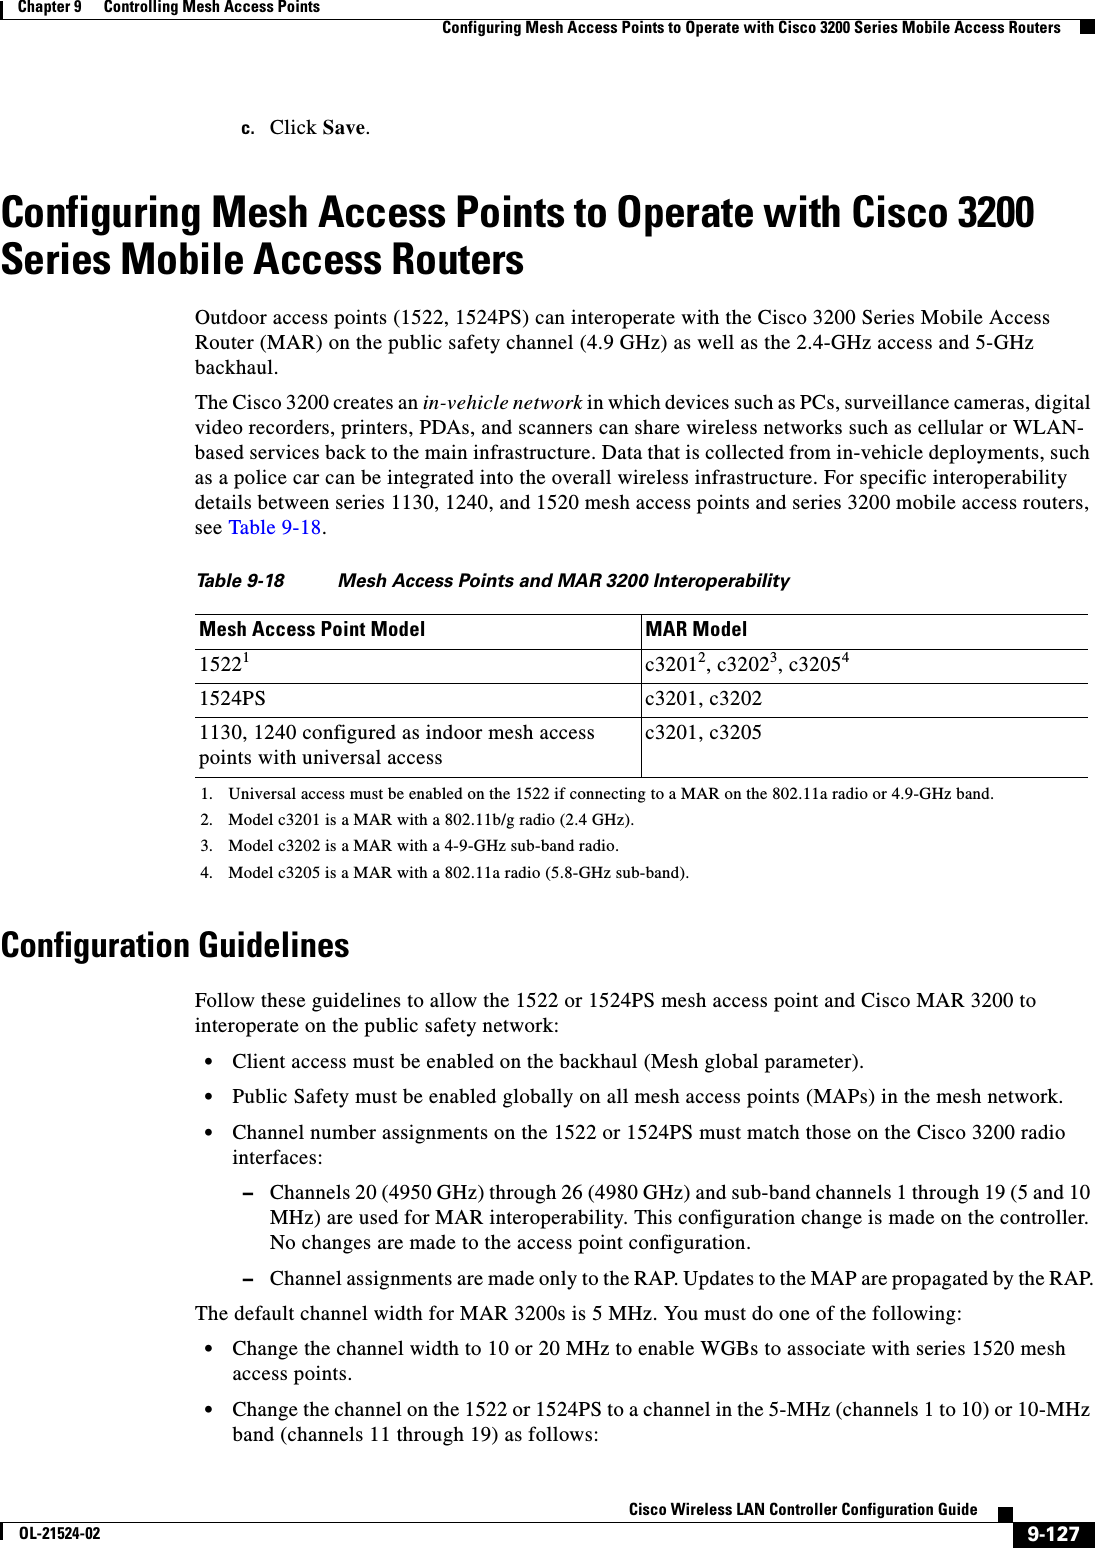  9-127Cisco Wireless LAN Controller Configuration GuideOL-21524-02Chapter 9      Controlling Mesh Access Points  Configuring Mesh Access Points to Operate with Cisco 3200 Series Mobile Access Routersc. Click Save.Configuring Mesh Access Points to Operate with Cisco 3200 Series Mobile Access Routers Outdoor access points (1522, 1524PS) can interoperate with the Cisco 3200 Series Mobile Access Router (MAR) on the public safety channel (4.9 GHz) as well as the 2.4-GHz access and 5-GHz backhaul. The Cisco 3200 creates an in-vehicle network in which devices such as PCs, surveillance cameras, digital video recorders, printers, PDAs, and scanners can share wireless networks such as cellular or WLAN- based services back to the main infrastructure. Data that is collected from in-vehicle deployments, such as a police car can be integrated into the overall wireless infrastructure. For specific interoperability details between series 1130, 1240, and 1520 mesh access points and series 3200 mobile access routers, see Table 9-18. Configuration GuidelinesFollow these guidelines to allow the 1522 or 1524PS mesh access point and Cisco MAR 3200 to interoperate on the public safety network:  • Client access must be enabled on the backhaul (Mesh global parameter).  • Public Safety must be enabled globally on all mesh access points (MAPs) in the mesh network.  • Channel number assignments on the 1522 or 1524PS must match those on the Cisco 3200 radio interfaces:  –Channels 20 (4950 GHz) through 26 (4980 GHz) and sub-band channels 1 through 19 (5 and 10 MHz) are used for MAR interoperability. This configuration change is made on the controller. No changes are made to the access point configuration.  –Channel assignments are made only to the RAP. Updates to the MAP are propagated by the RAP.The default channel width for MAR 3200s is 5 MHz. You must do one of the following:  • Change the channel width to 10 or 20 MHz to enable WGBs to associate with series 1520 mesh access points.  • Change the channel on the 1522 or 1524PS to a channel in the 5-MHz (channels 1 to 10) or 10-MHz band (channels 11 through 19) as follows:Ta b l e  9-18 Mesh Access Points and MAR 3200 InteroperabilityMesh Access Point Model MAR Model15221c32012, c32023, c320541524PS c3201, c32021130, 1240 configured as indoor mesh access points with universal accessc3201, c32051. Universal access must be enabled on the 1522 if connecting to a MAR on the 802.11a radio or 4.9-GHz band.2. Model c3201 is a MAR with a 802.11b/g radio (2.4 GHz).3. Model c3202 is a MAR with a 4-9-GHz sub-band radio.4. Model c3205 is a MAR with a 802.11a radio (5.8-GHz sub-band).